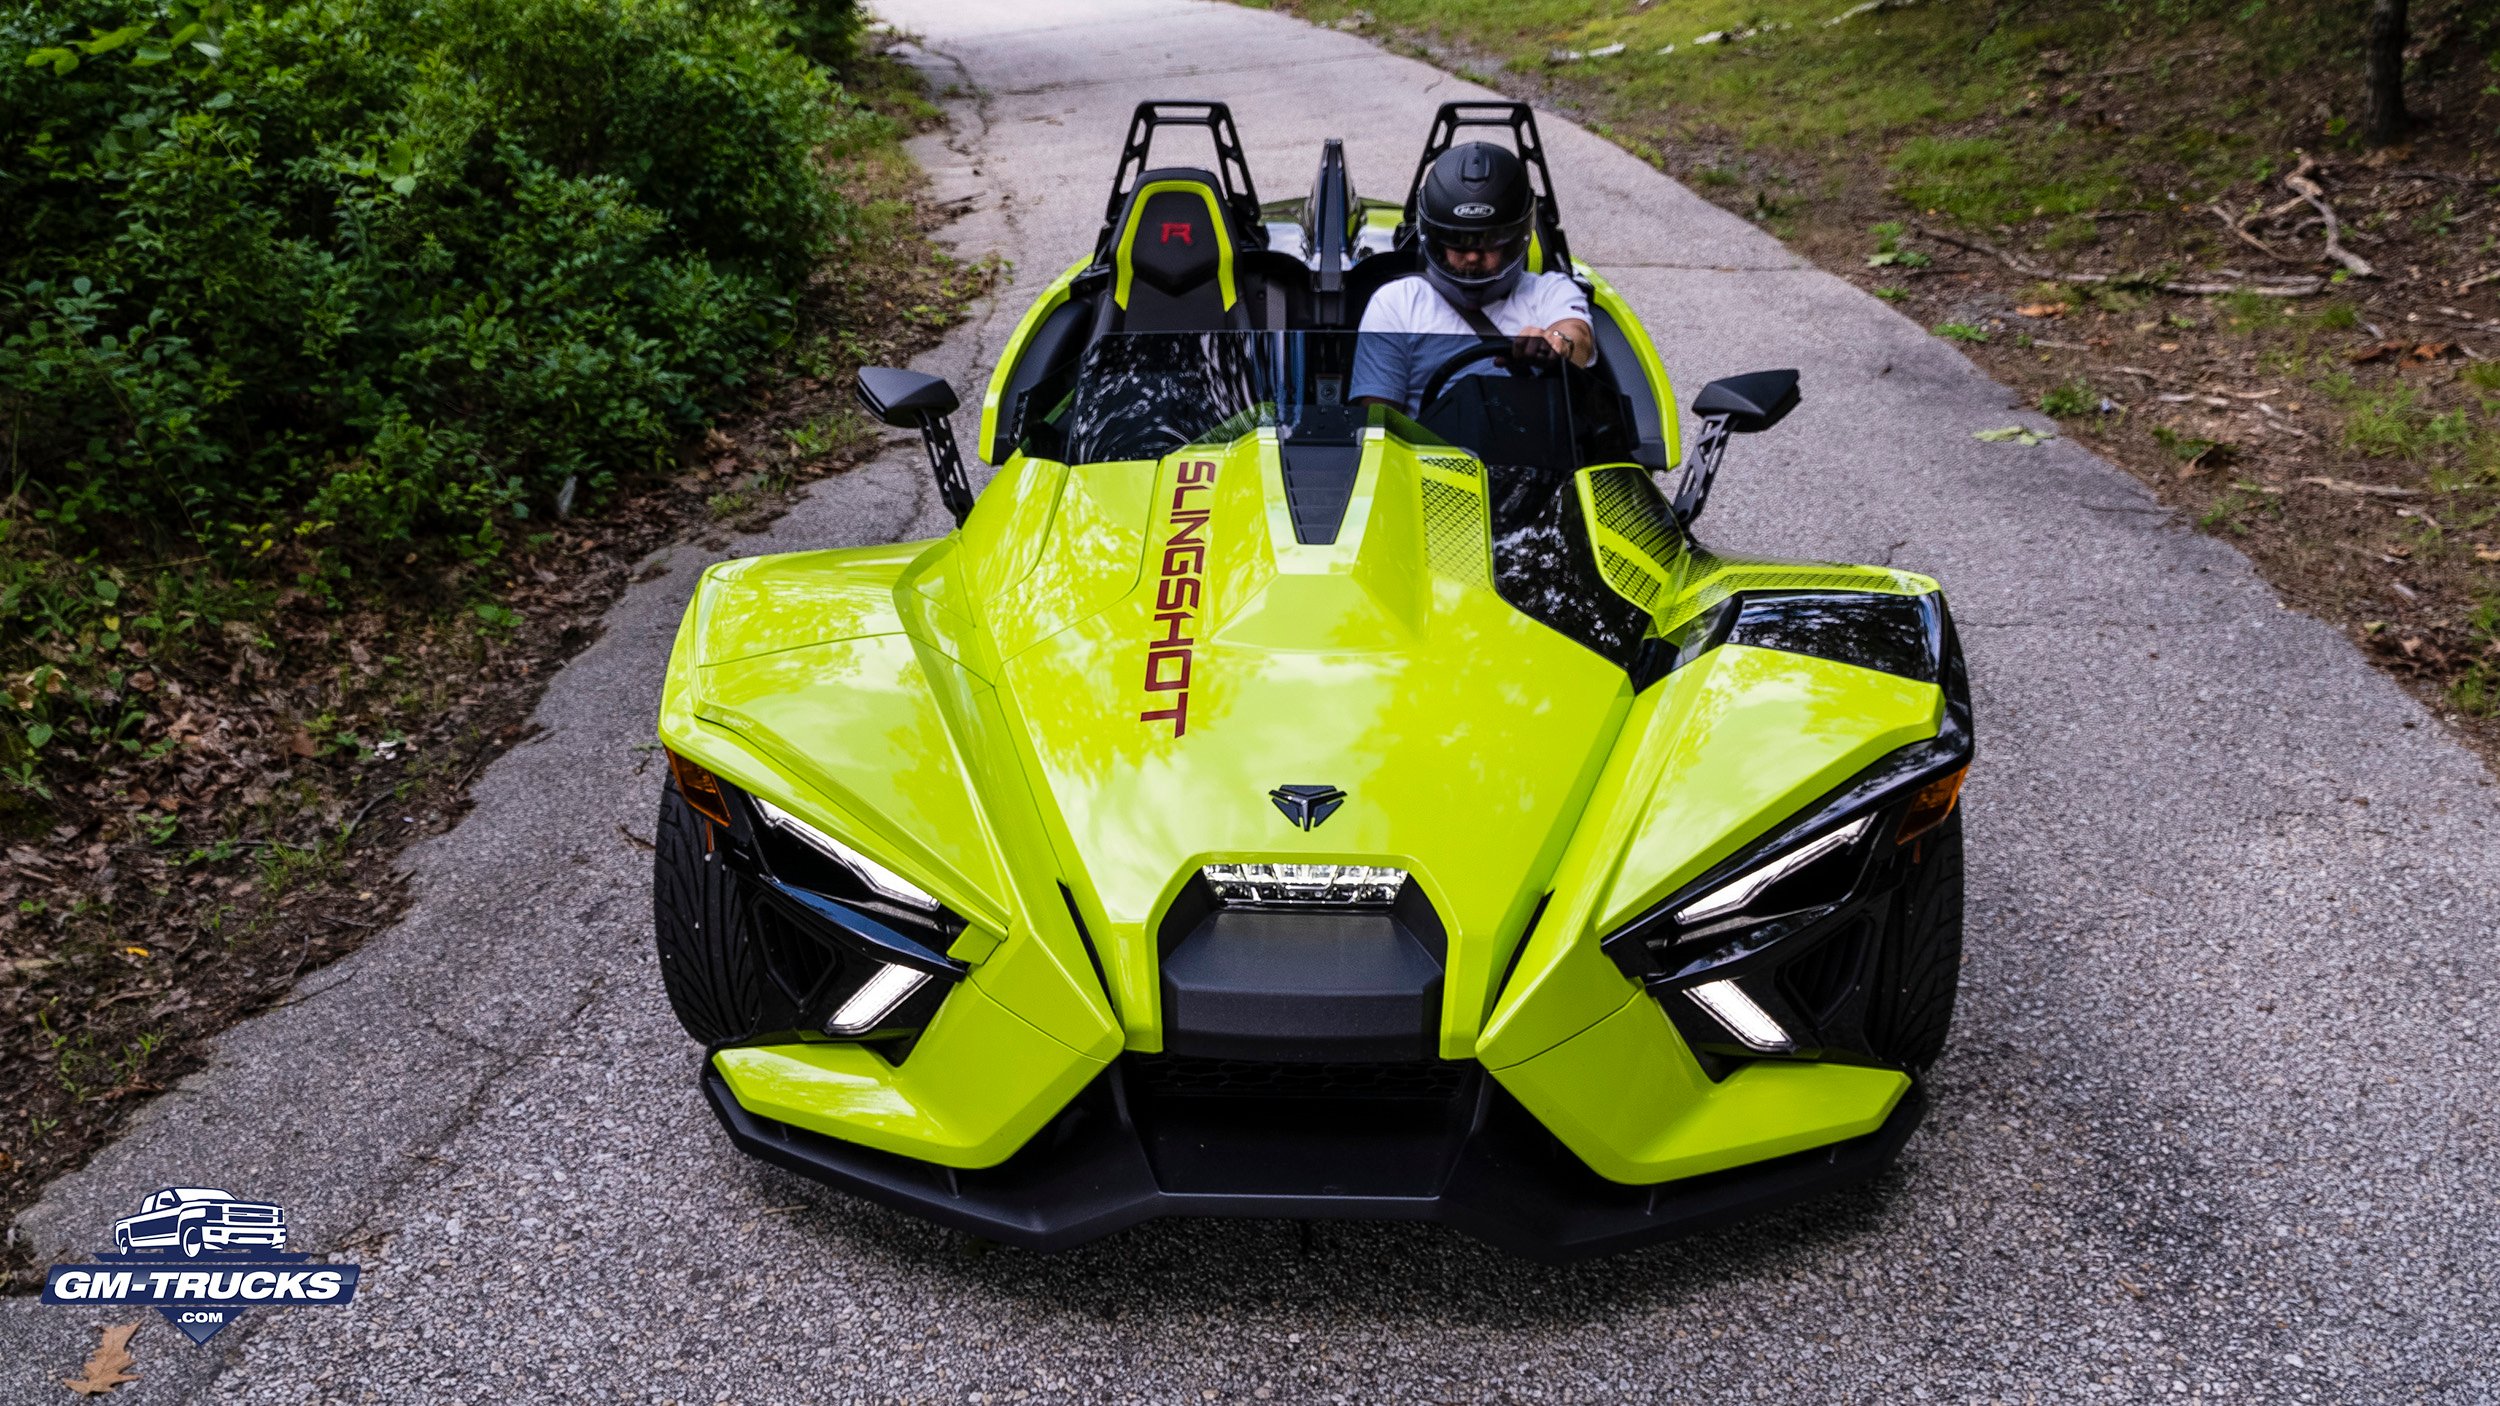 Reviewed: 2021 Polaris Slingshot R Limited Edition